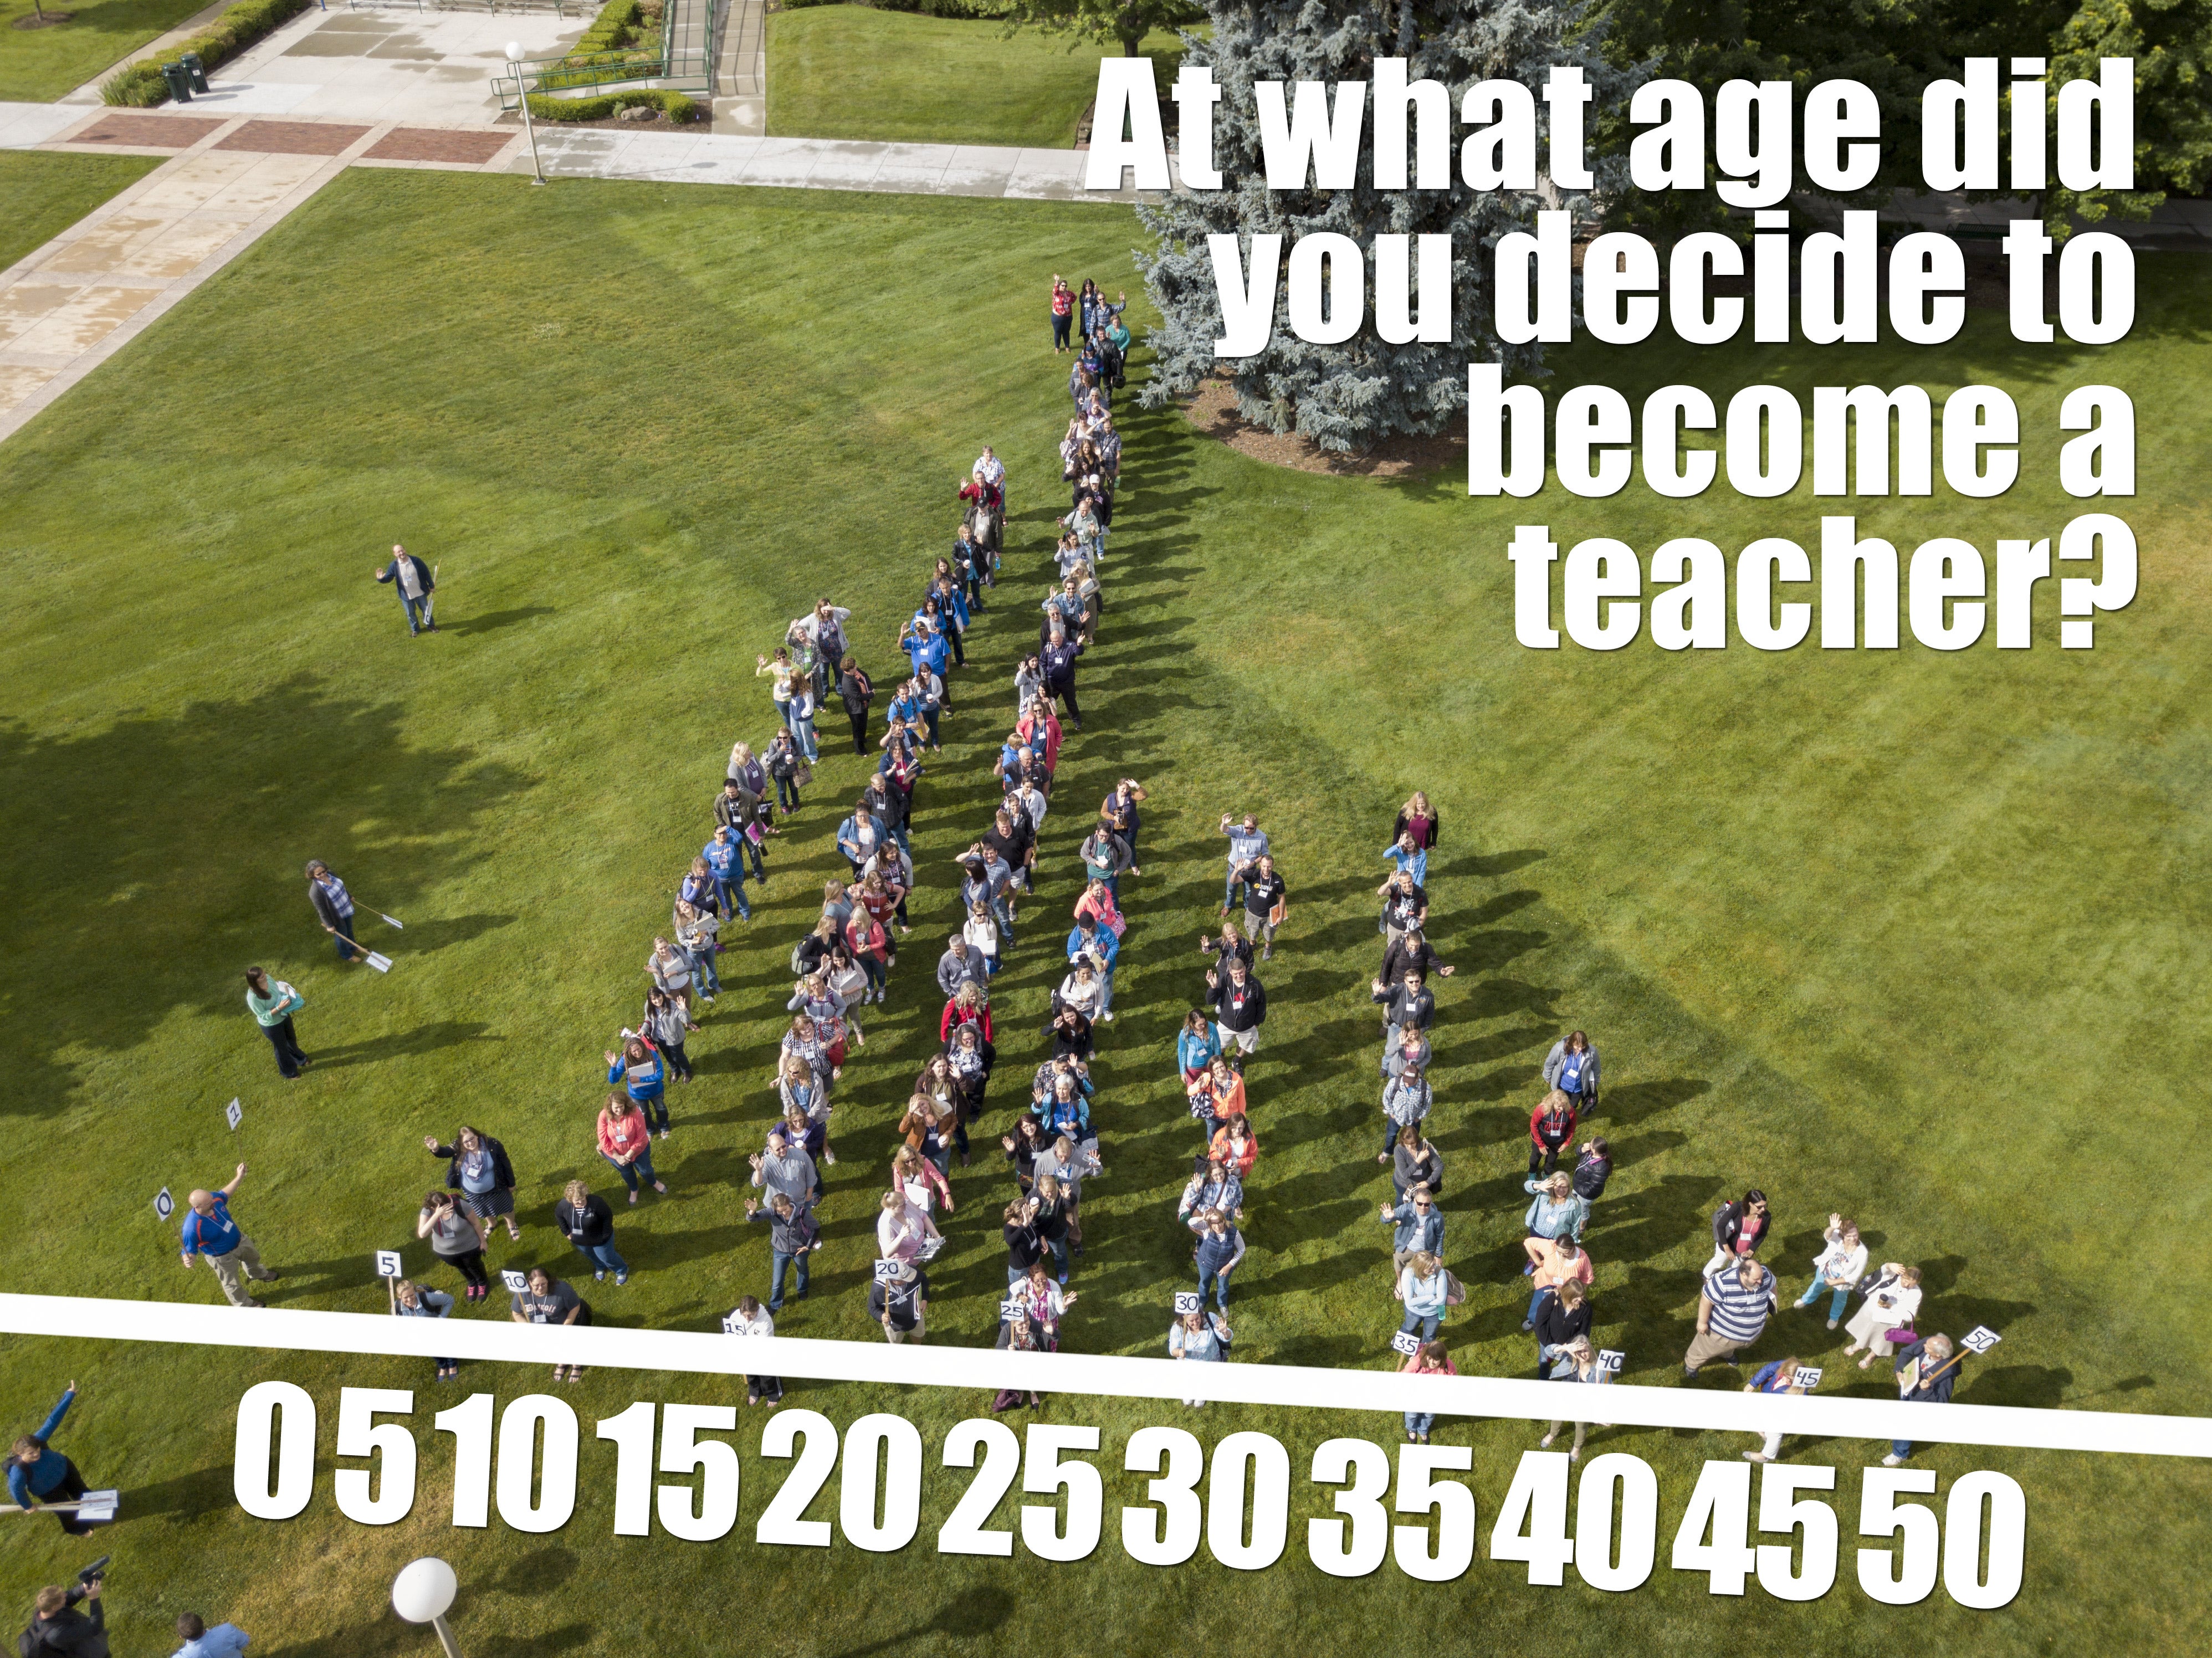 Image of teachers lined up with text "At what age did you decide to become a teacher?" at top and an age range 0-50 at the bottom, with teachers in corresponding lines.